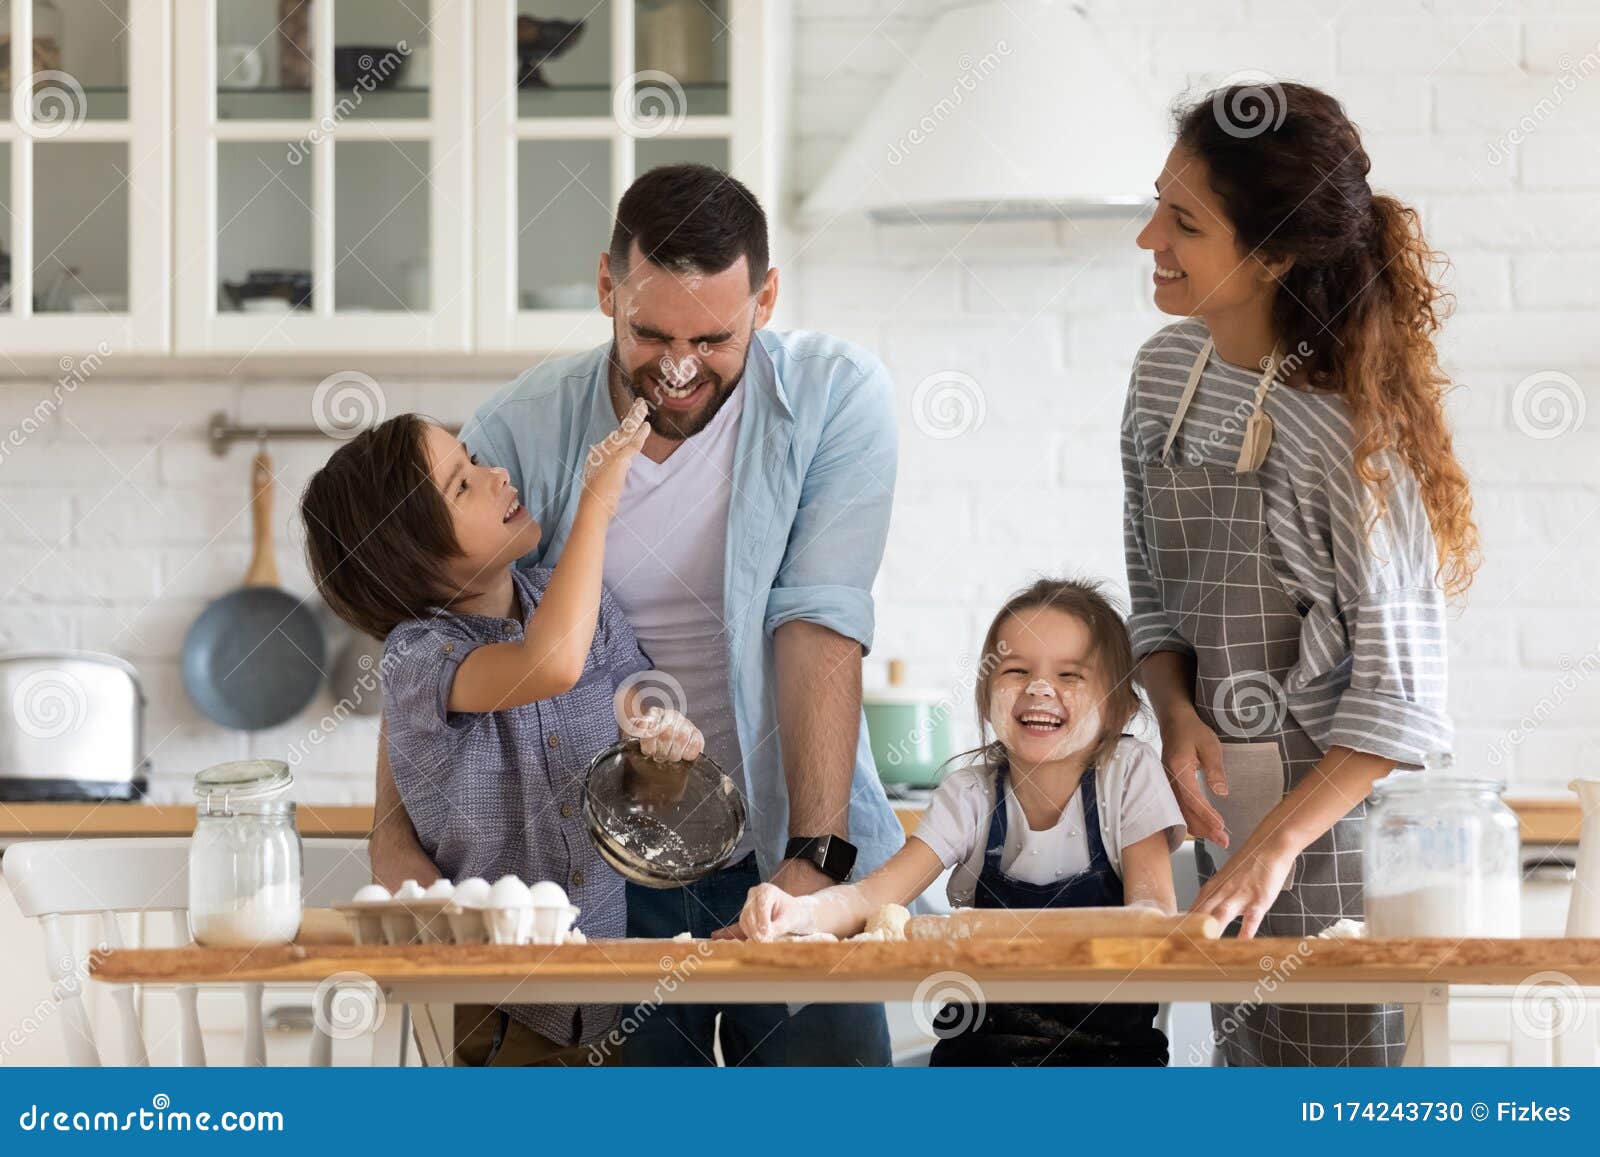 overjoyed parents with little kids have fun cooking in kitchen